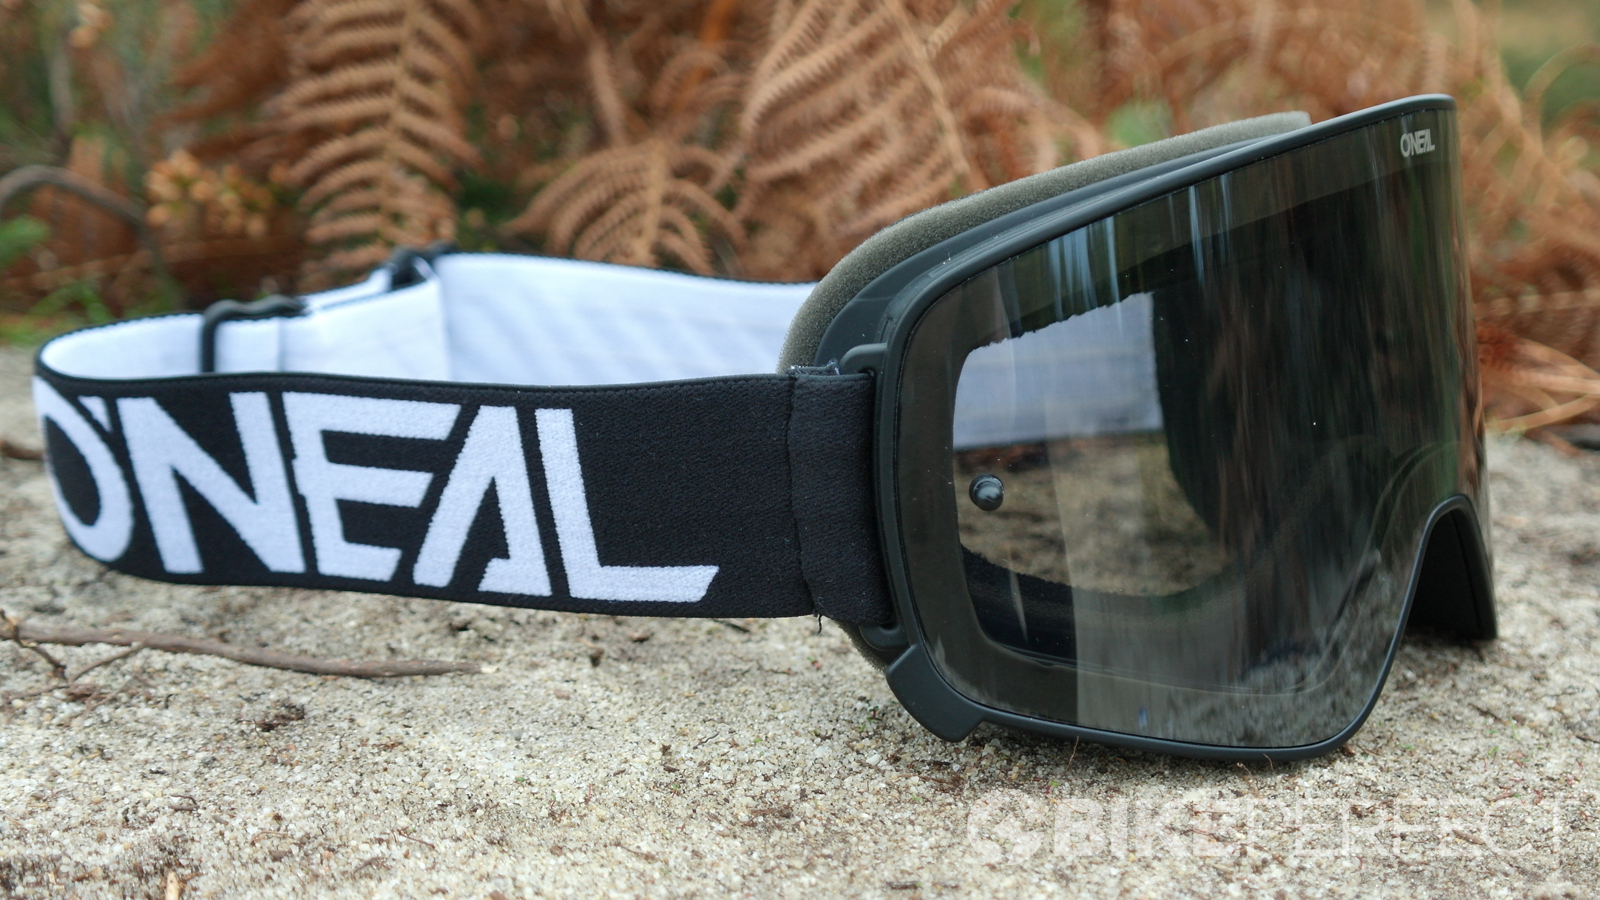 O 'Neal tear off laminated abreißvisier 14er Pack per b50 Goggle ONeal 